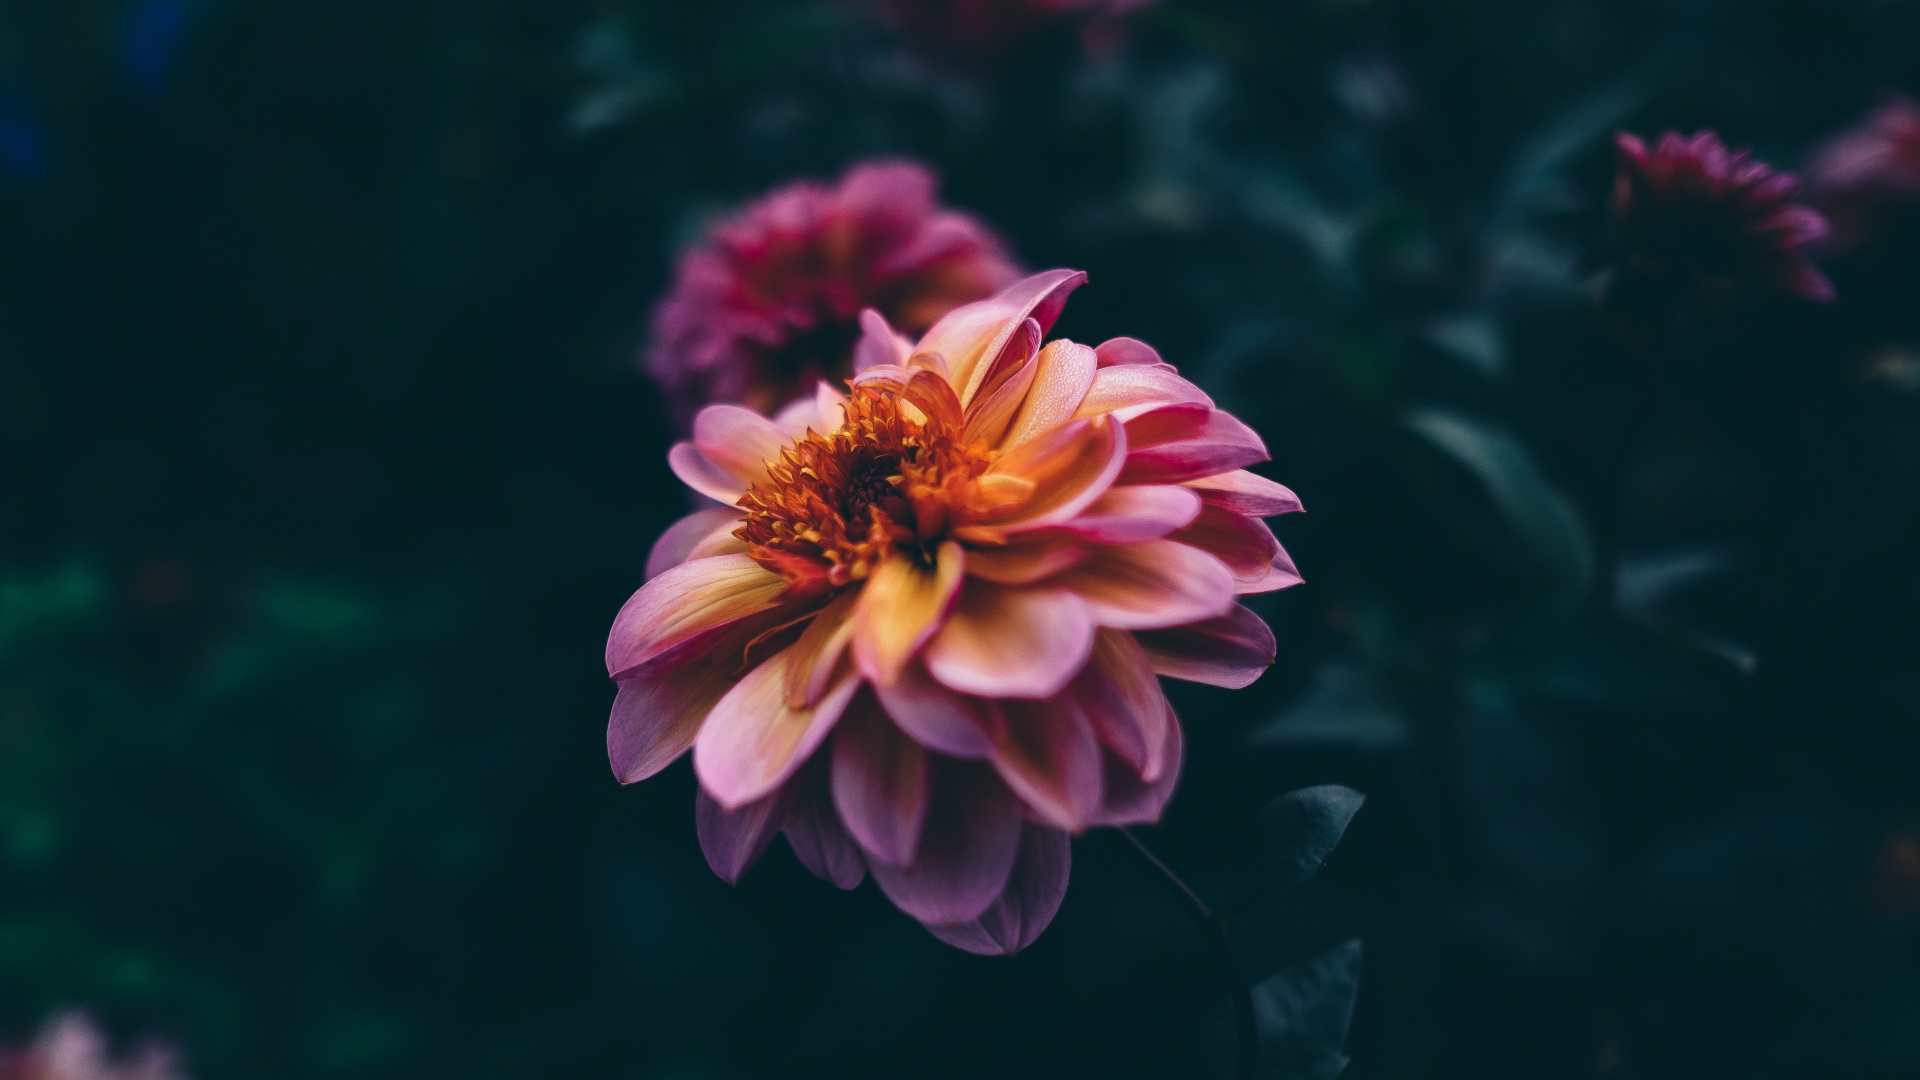 Pink and Yellow Flower in Tilt Shift Lens. Wallpaper in 1920x1080 Resolution